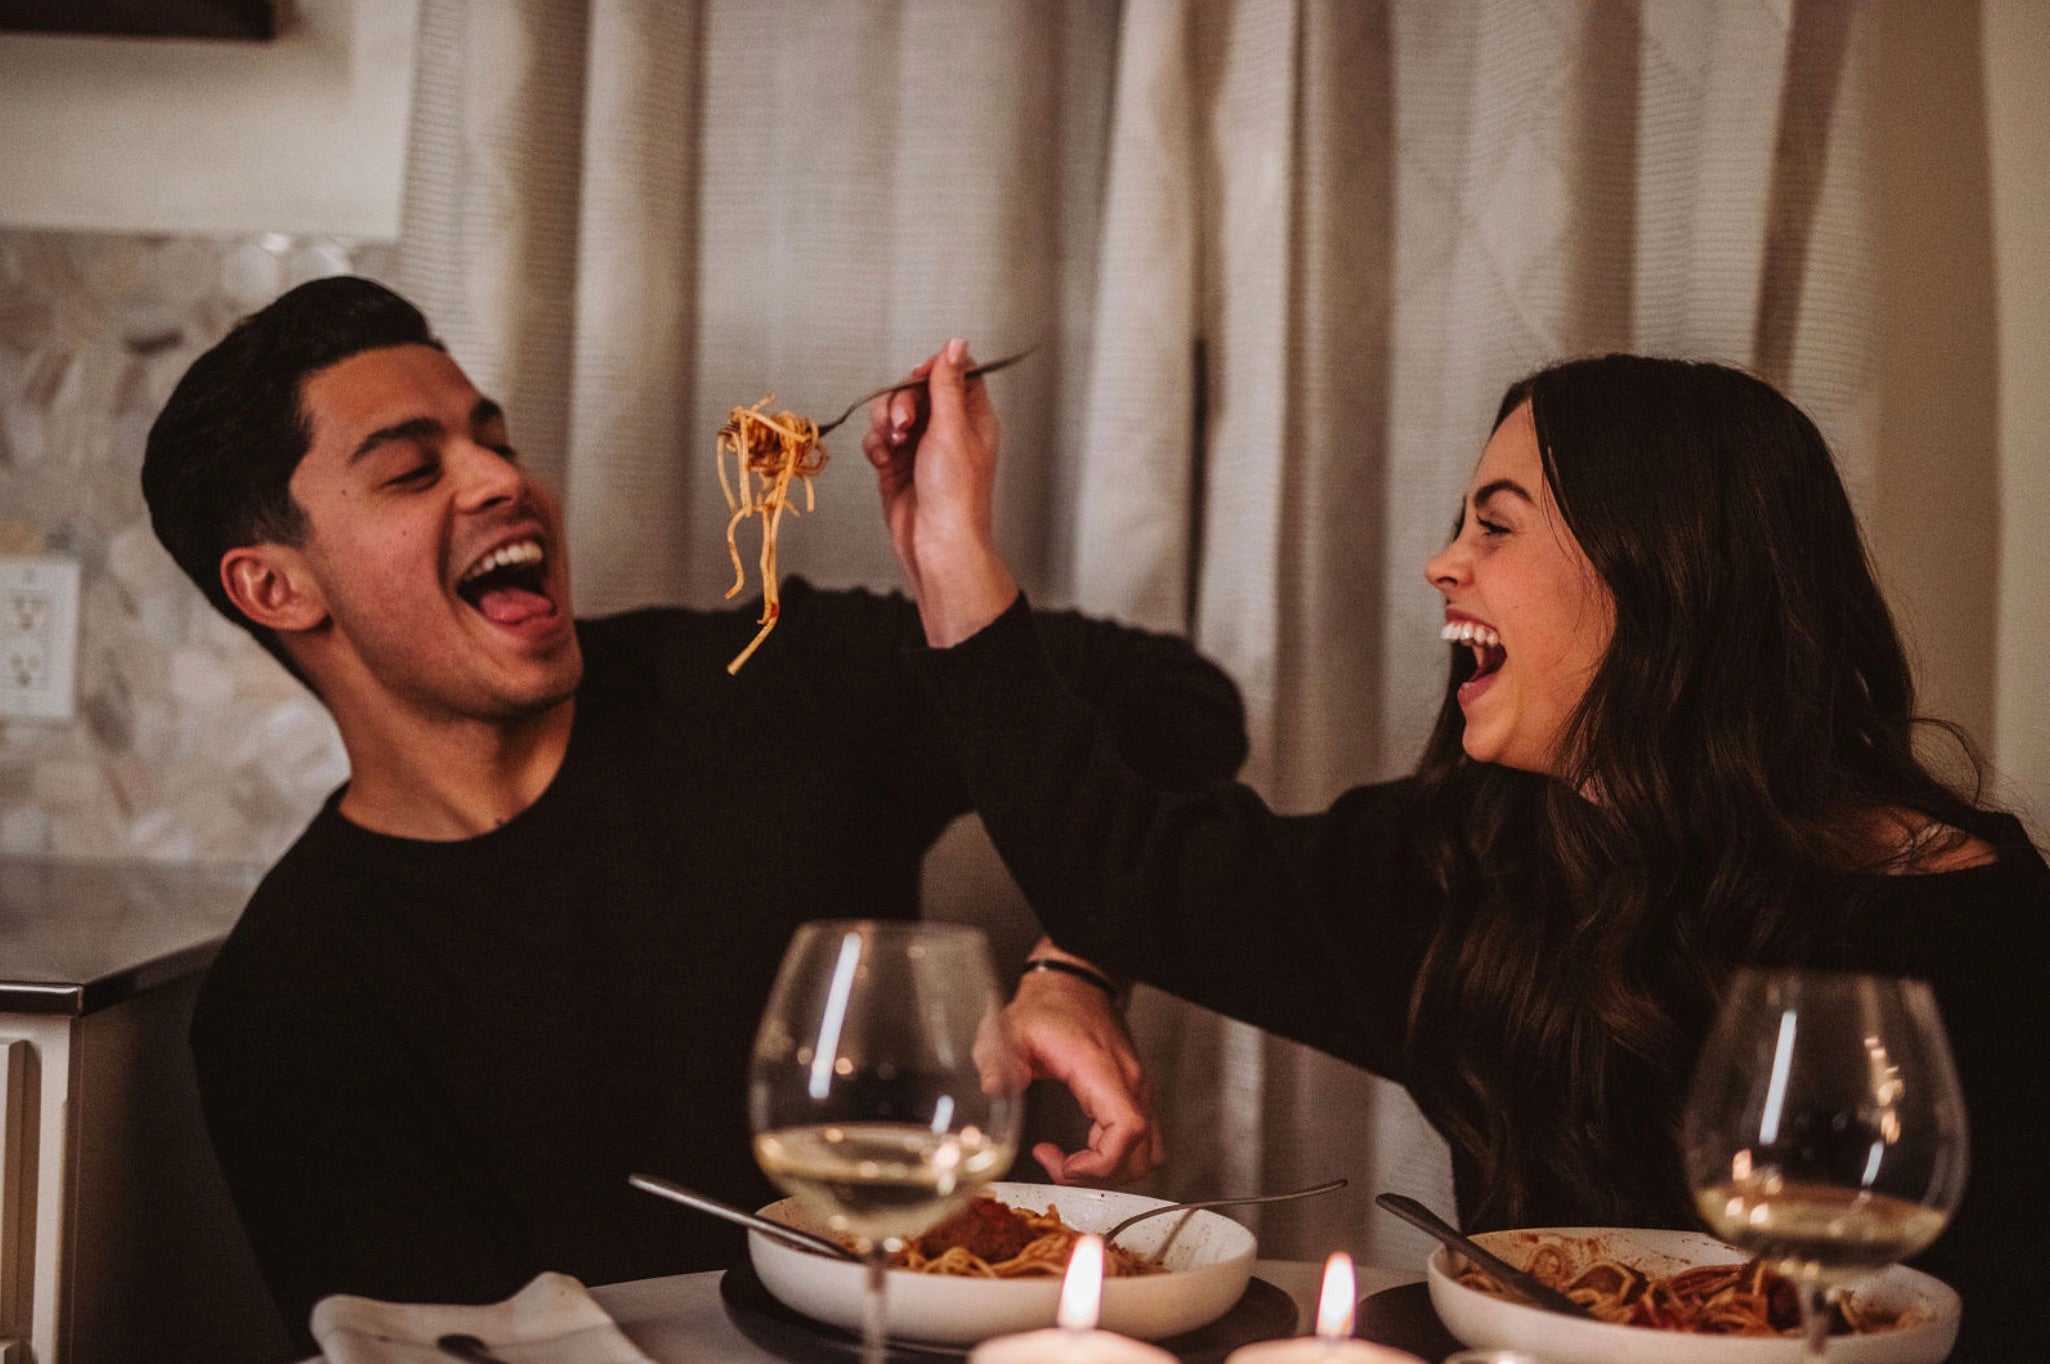 At Home Date Night Ideas: Couple sharing laughs as they feed each other spaghetti during their dinner date